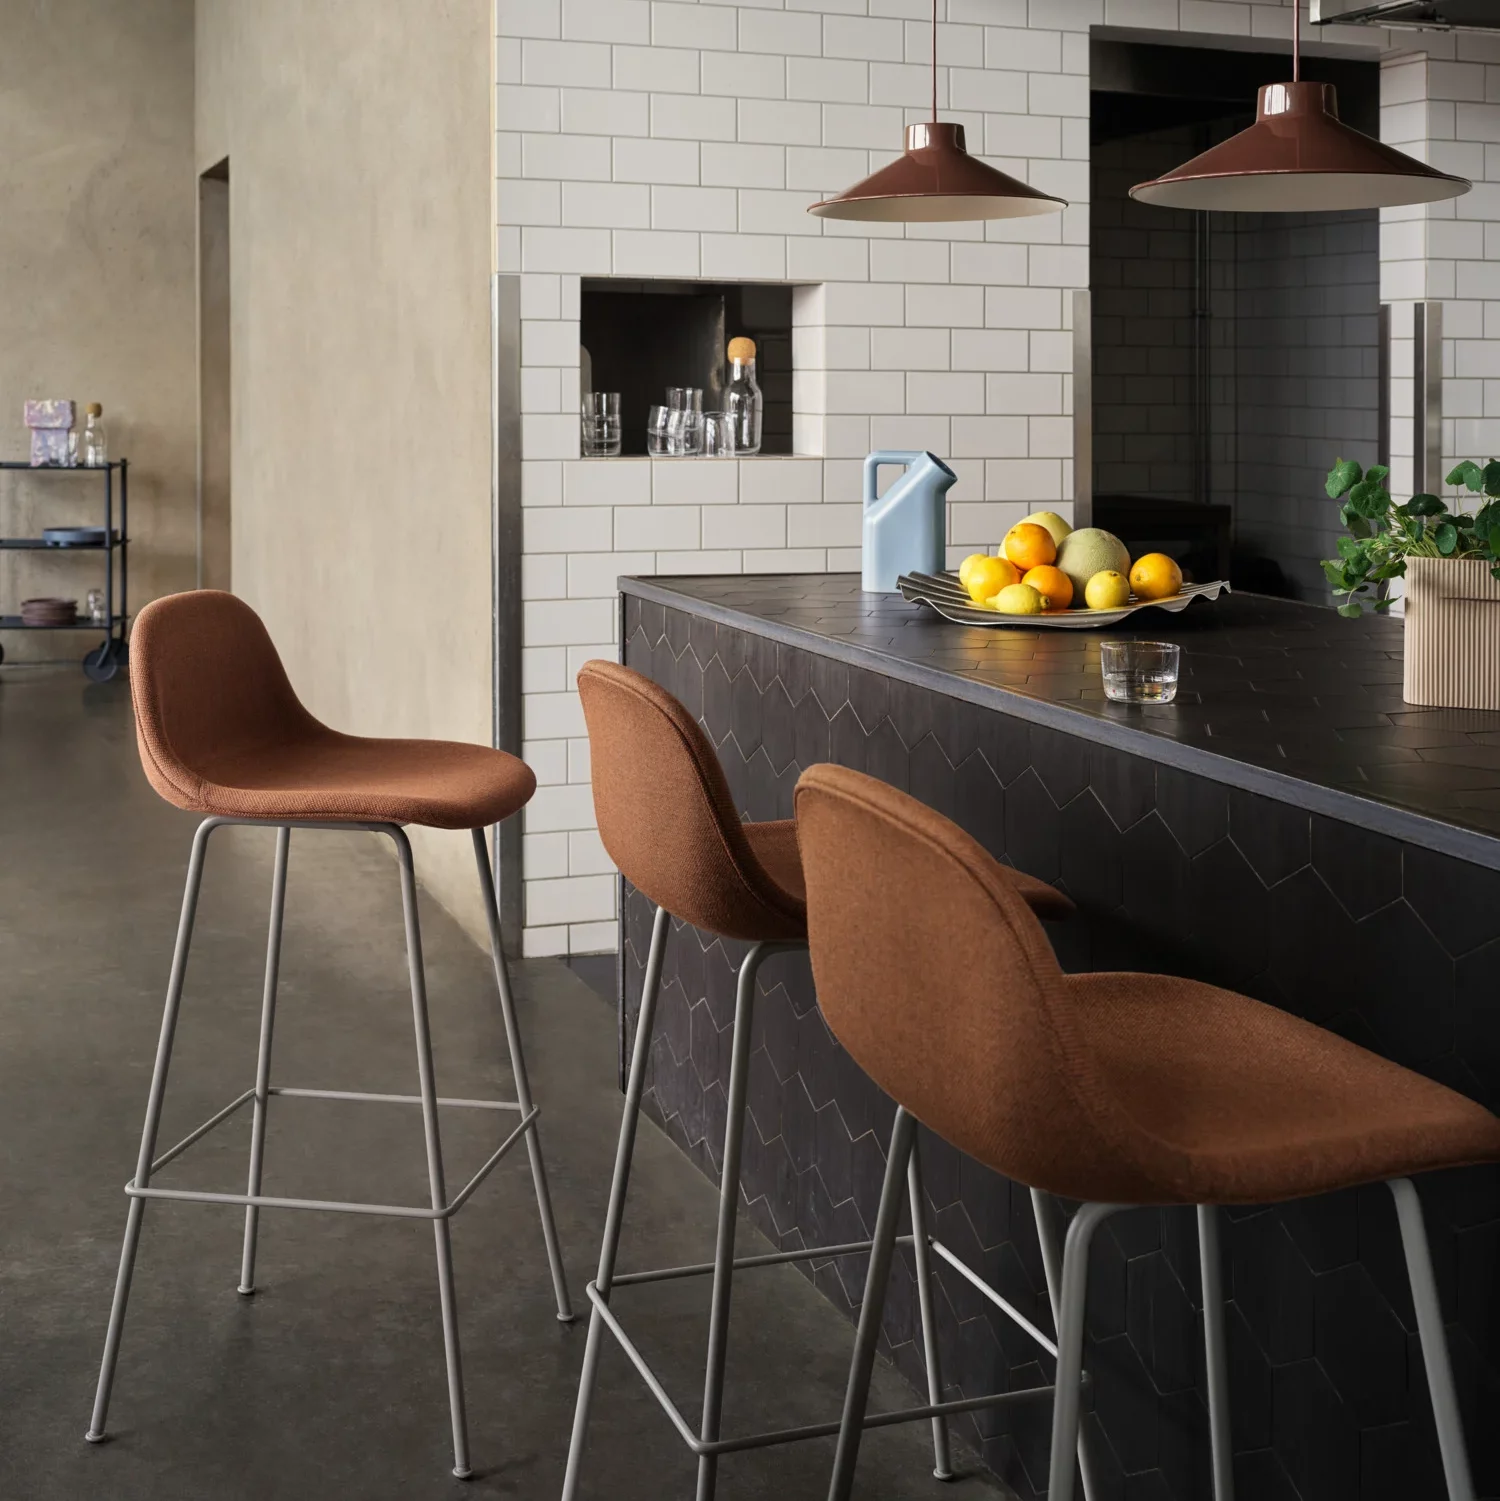 Brown fabric kitchen counter stools.